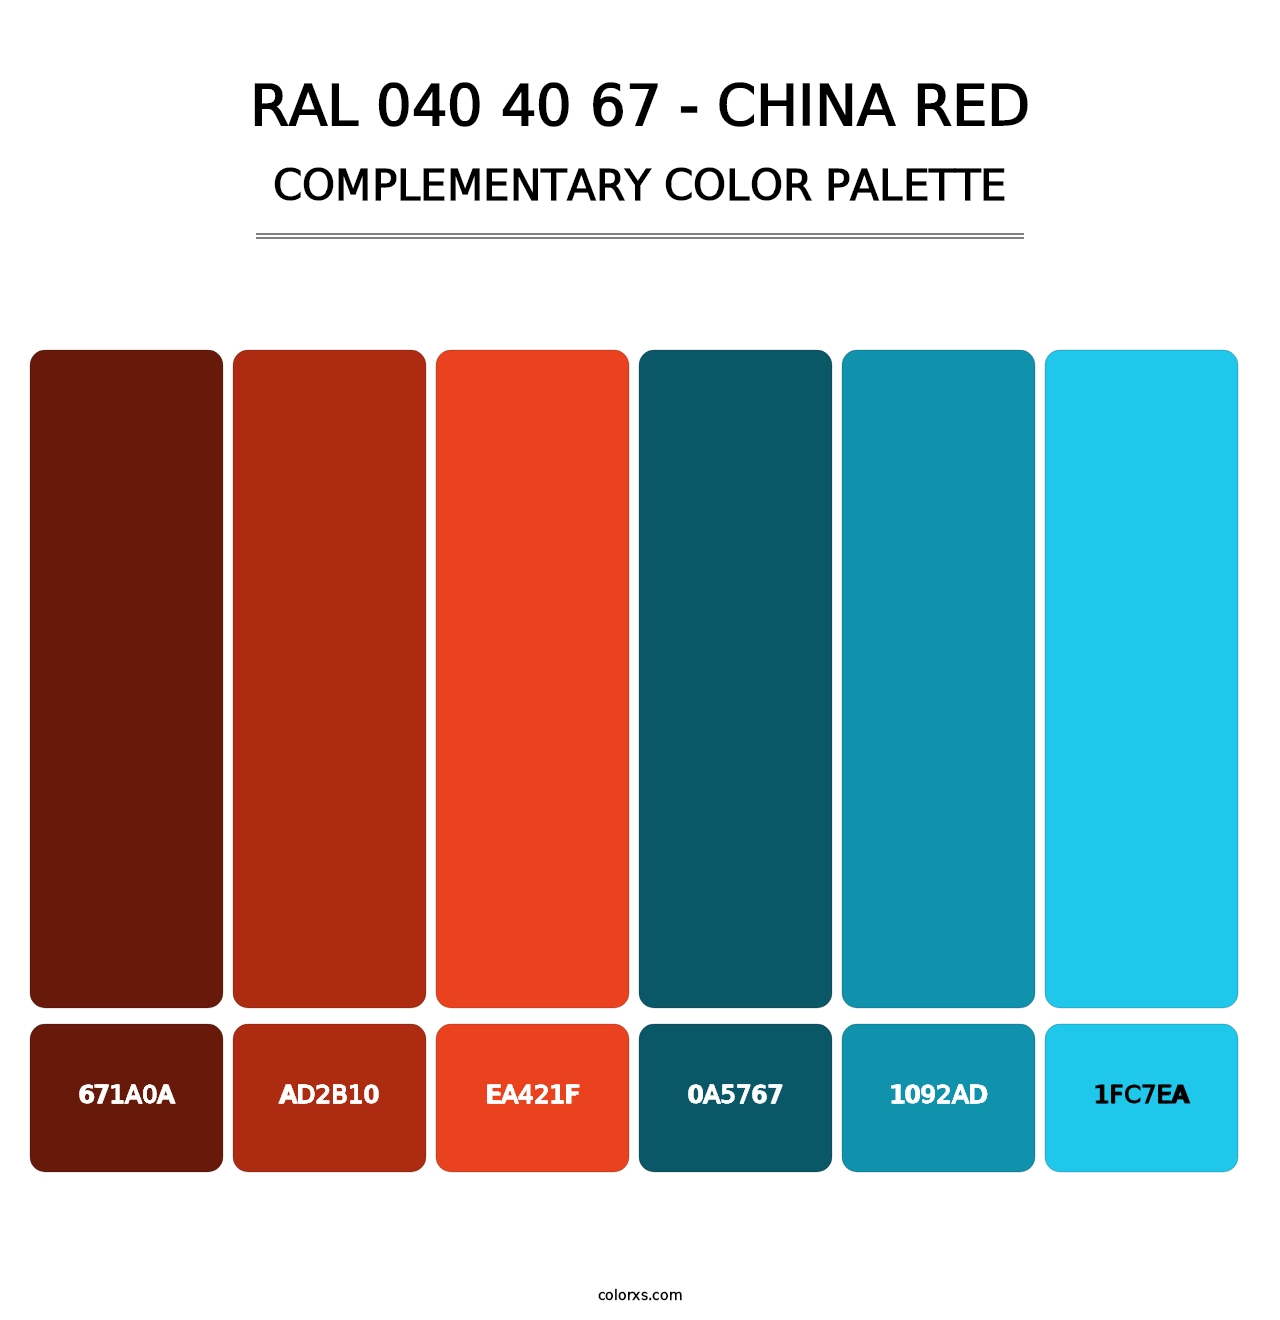 RAL 040 40 67 - China Red - Complementary Color Palette